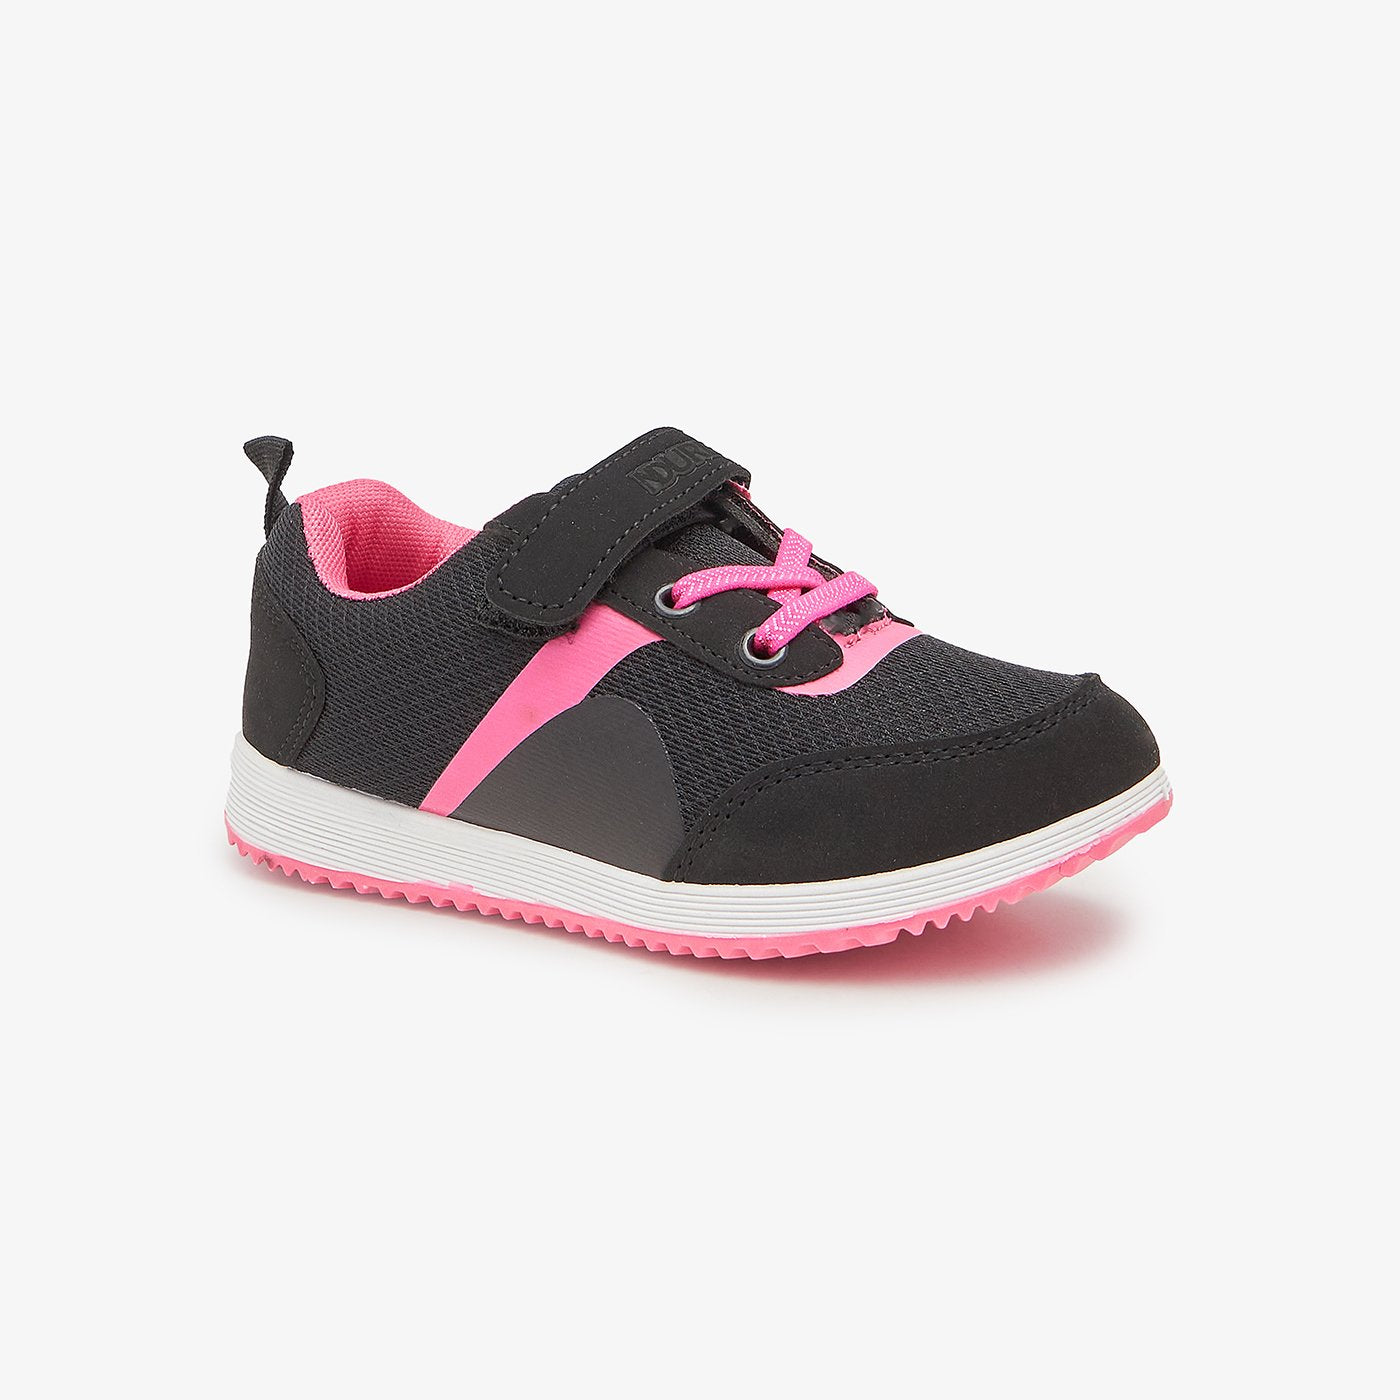 Ndure Athletic Shoes for Girls